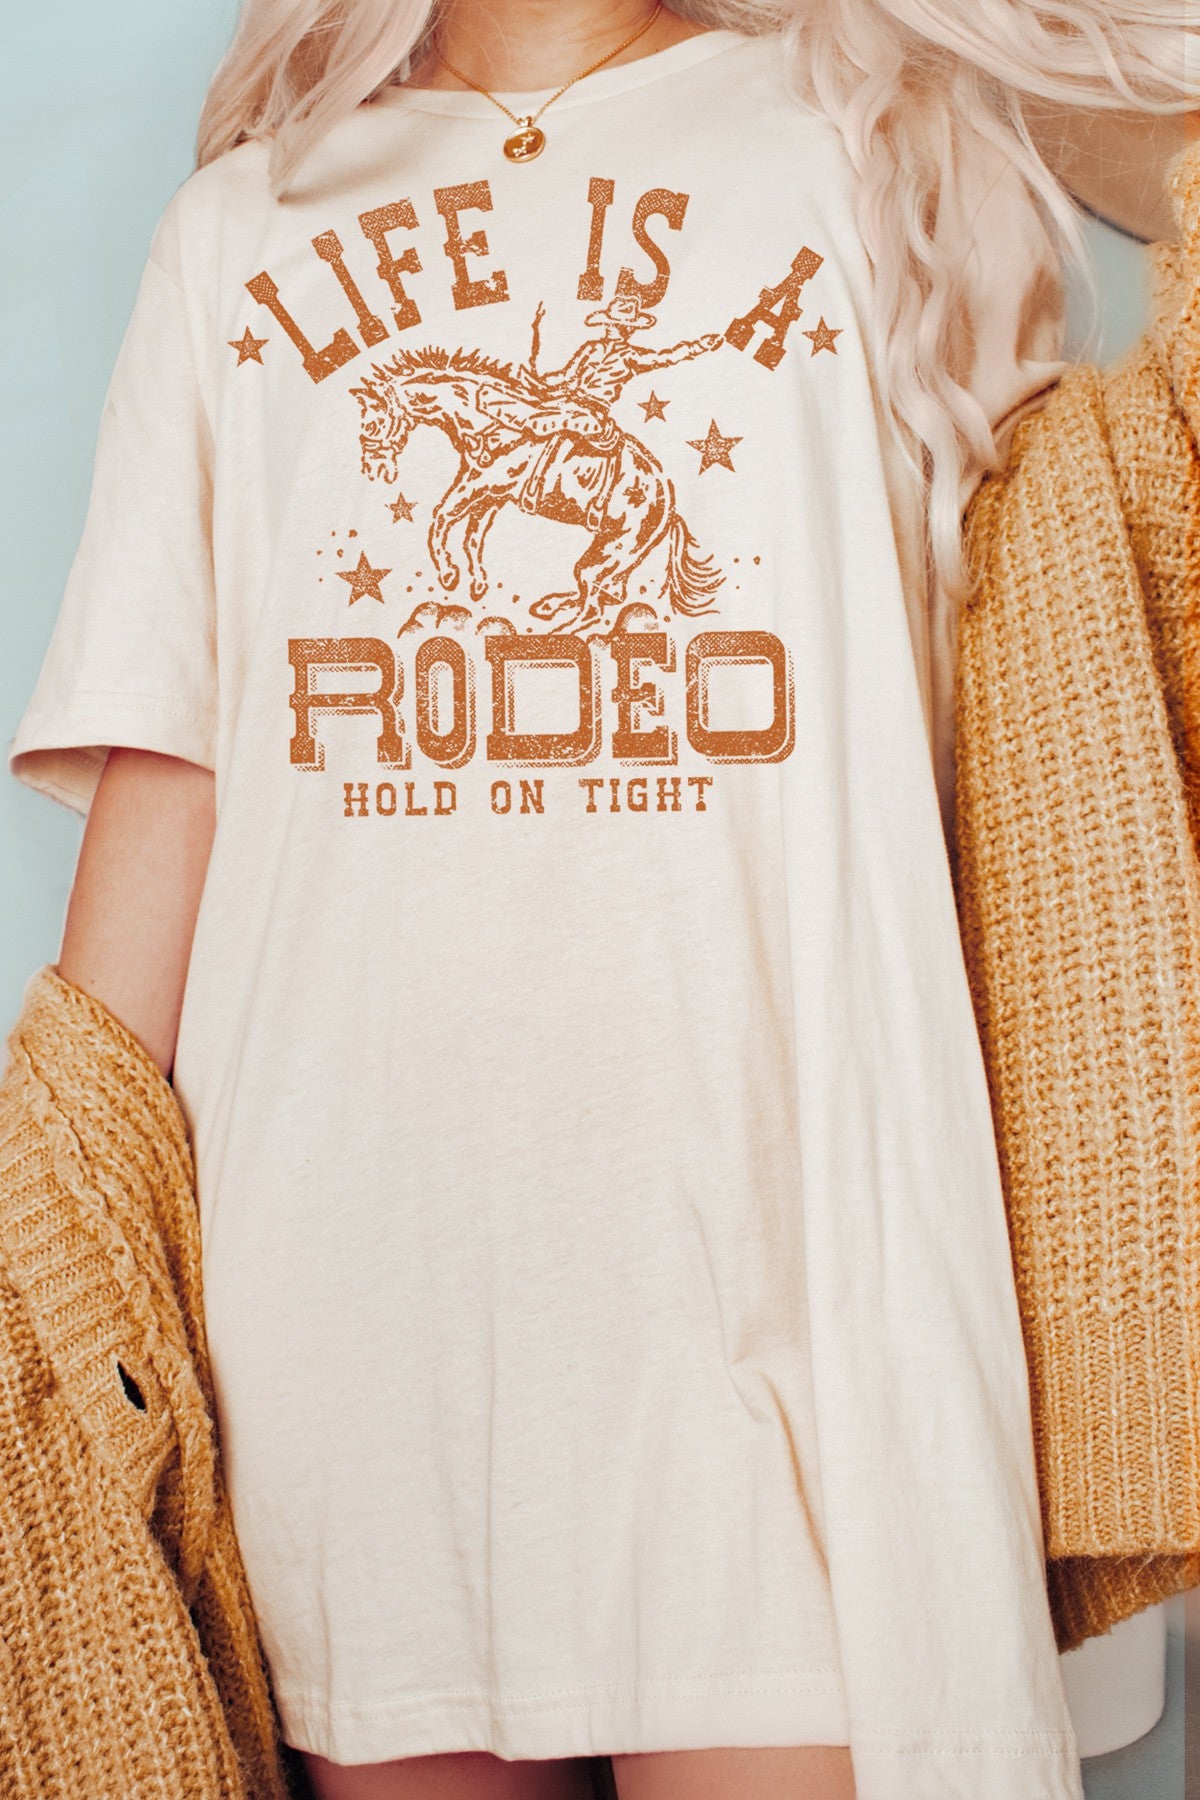 Chad Rodeo Life Oversized Graphic Tee ✜ON SALE NOW: 25% OFF✜